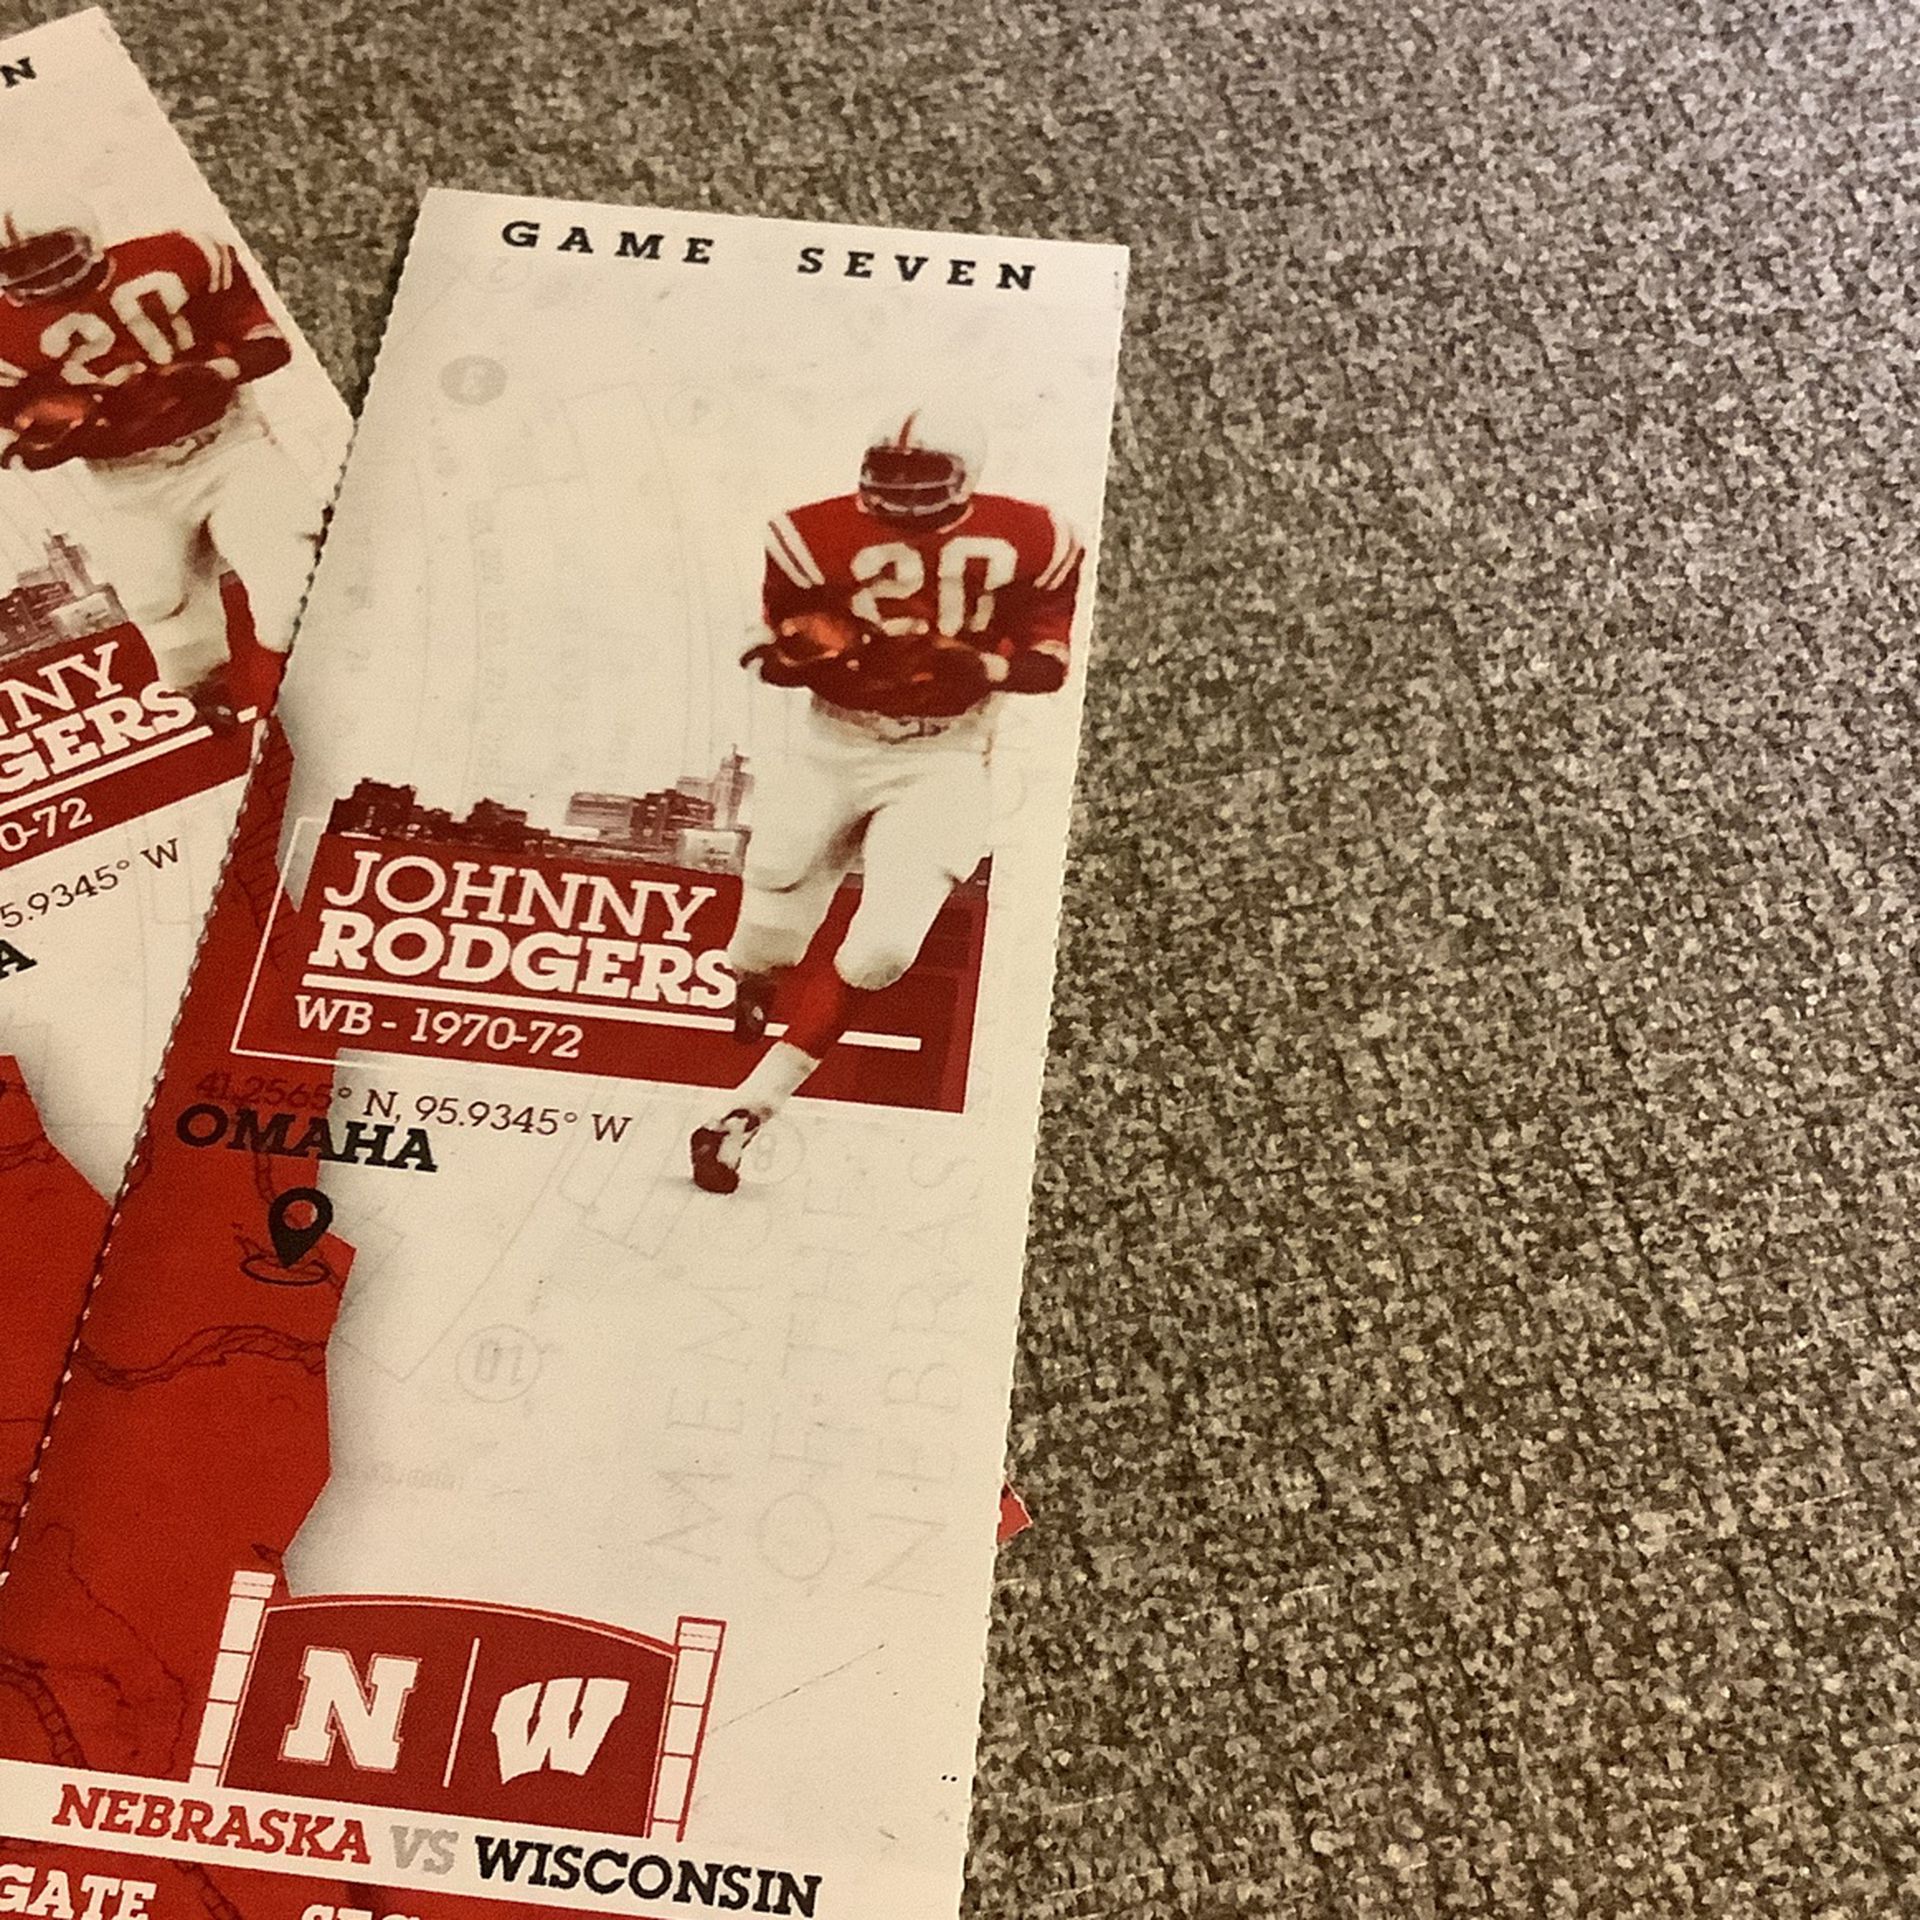 Football Tickets - November 19, NE vs WI.  Section 14, row 47, seat 5 & 6 - $120 for the pair